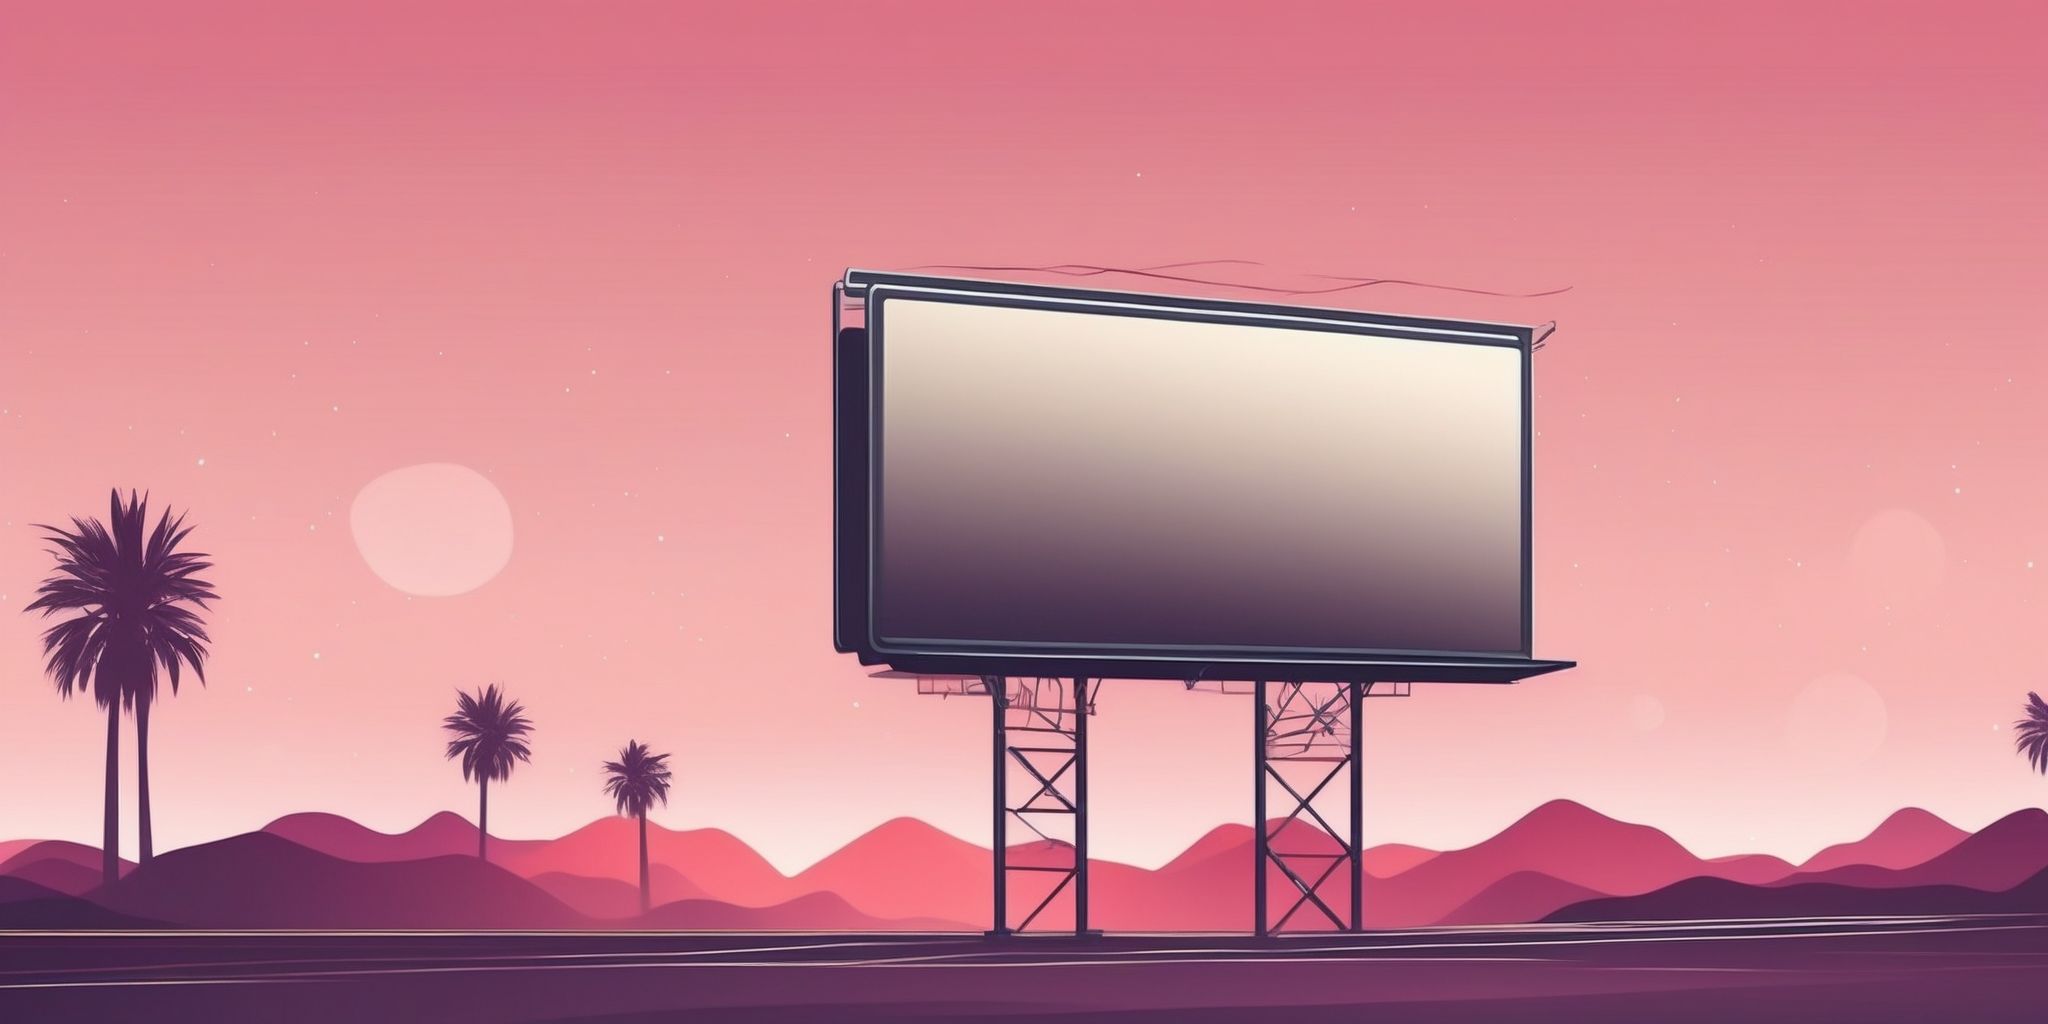 Billboard in illustration style with gradients and white background